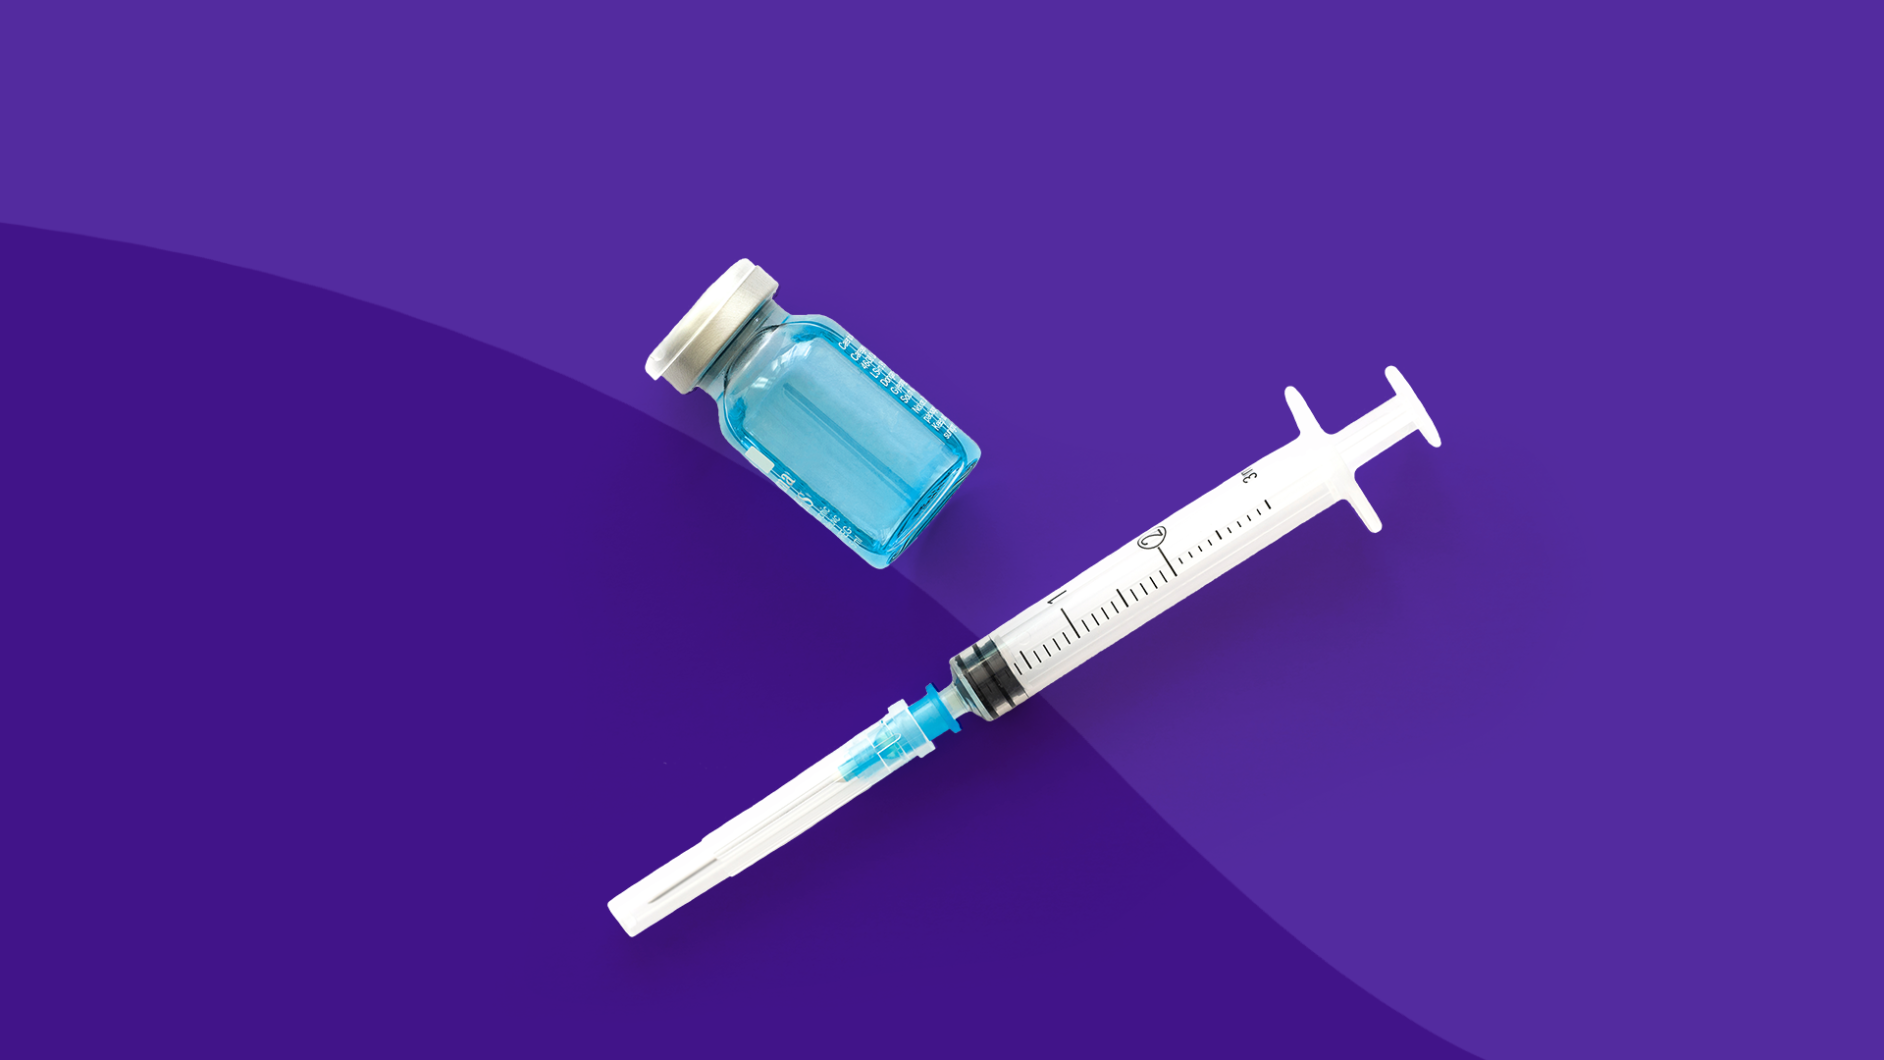 An image of a hepatitis A vaccine